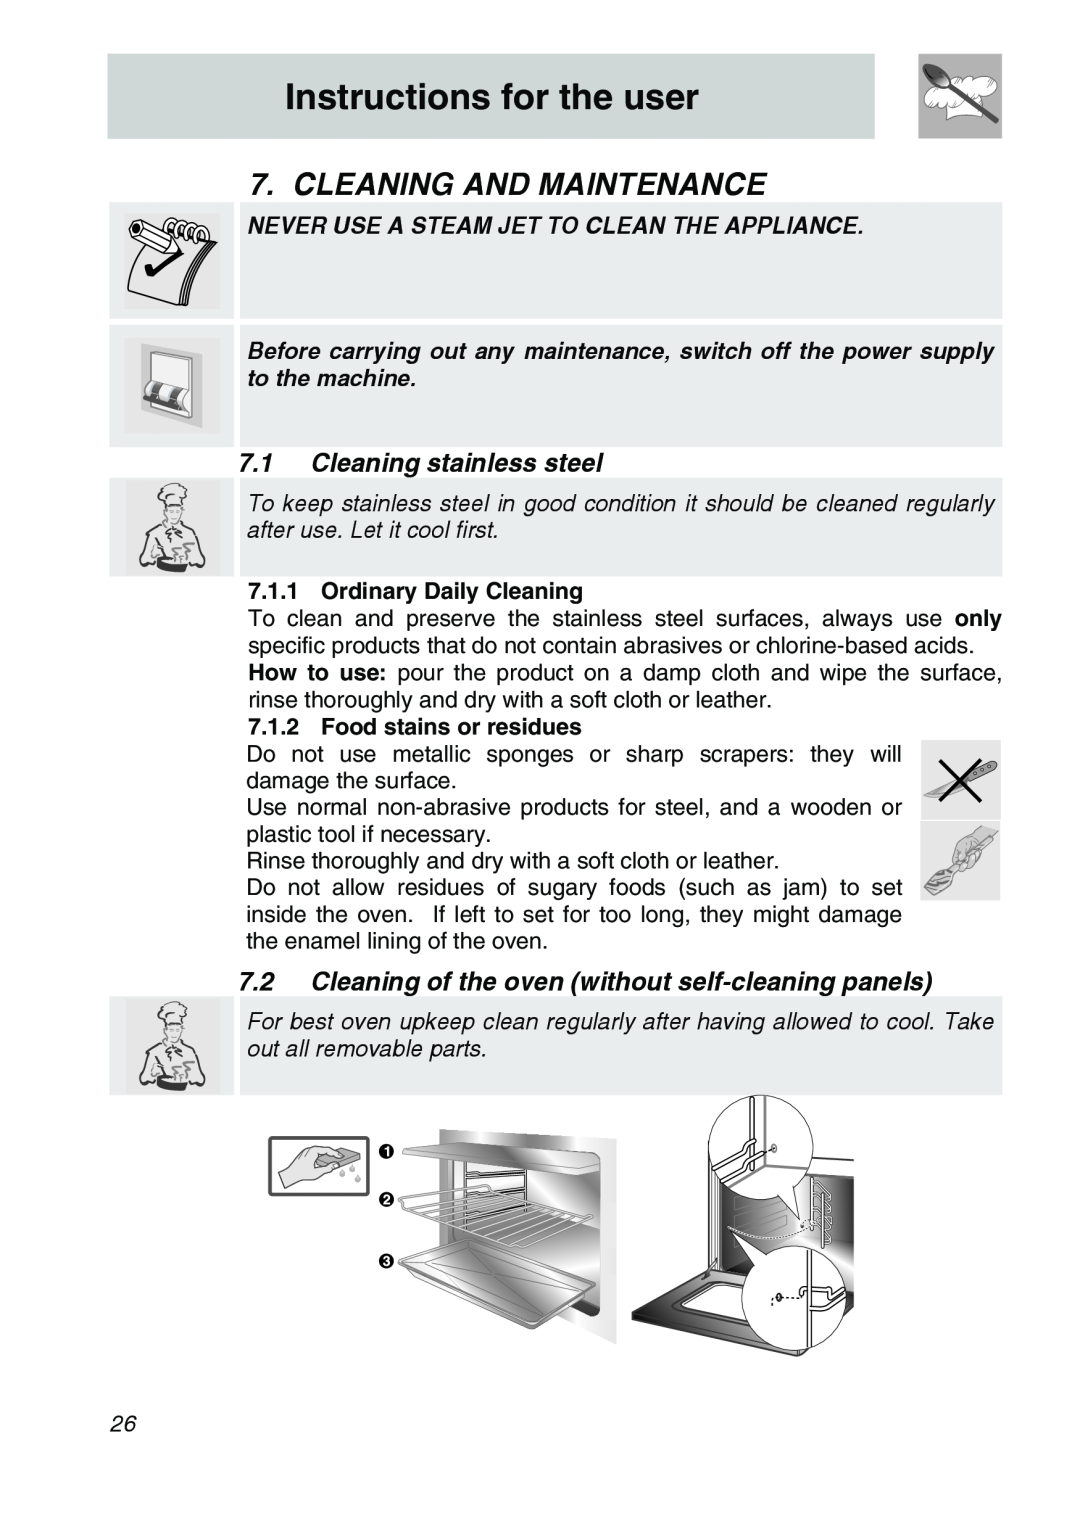 Smeg SA301W-5 Cleaning And Maintenance, 7.1Cleaning stainless steel, Instructions for the user, Ordinary Daily Cleaning 